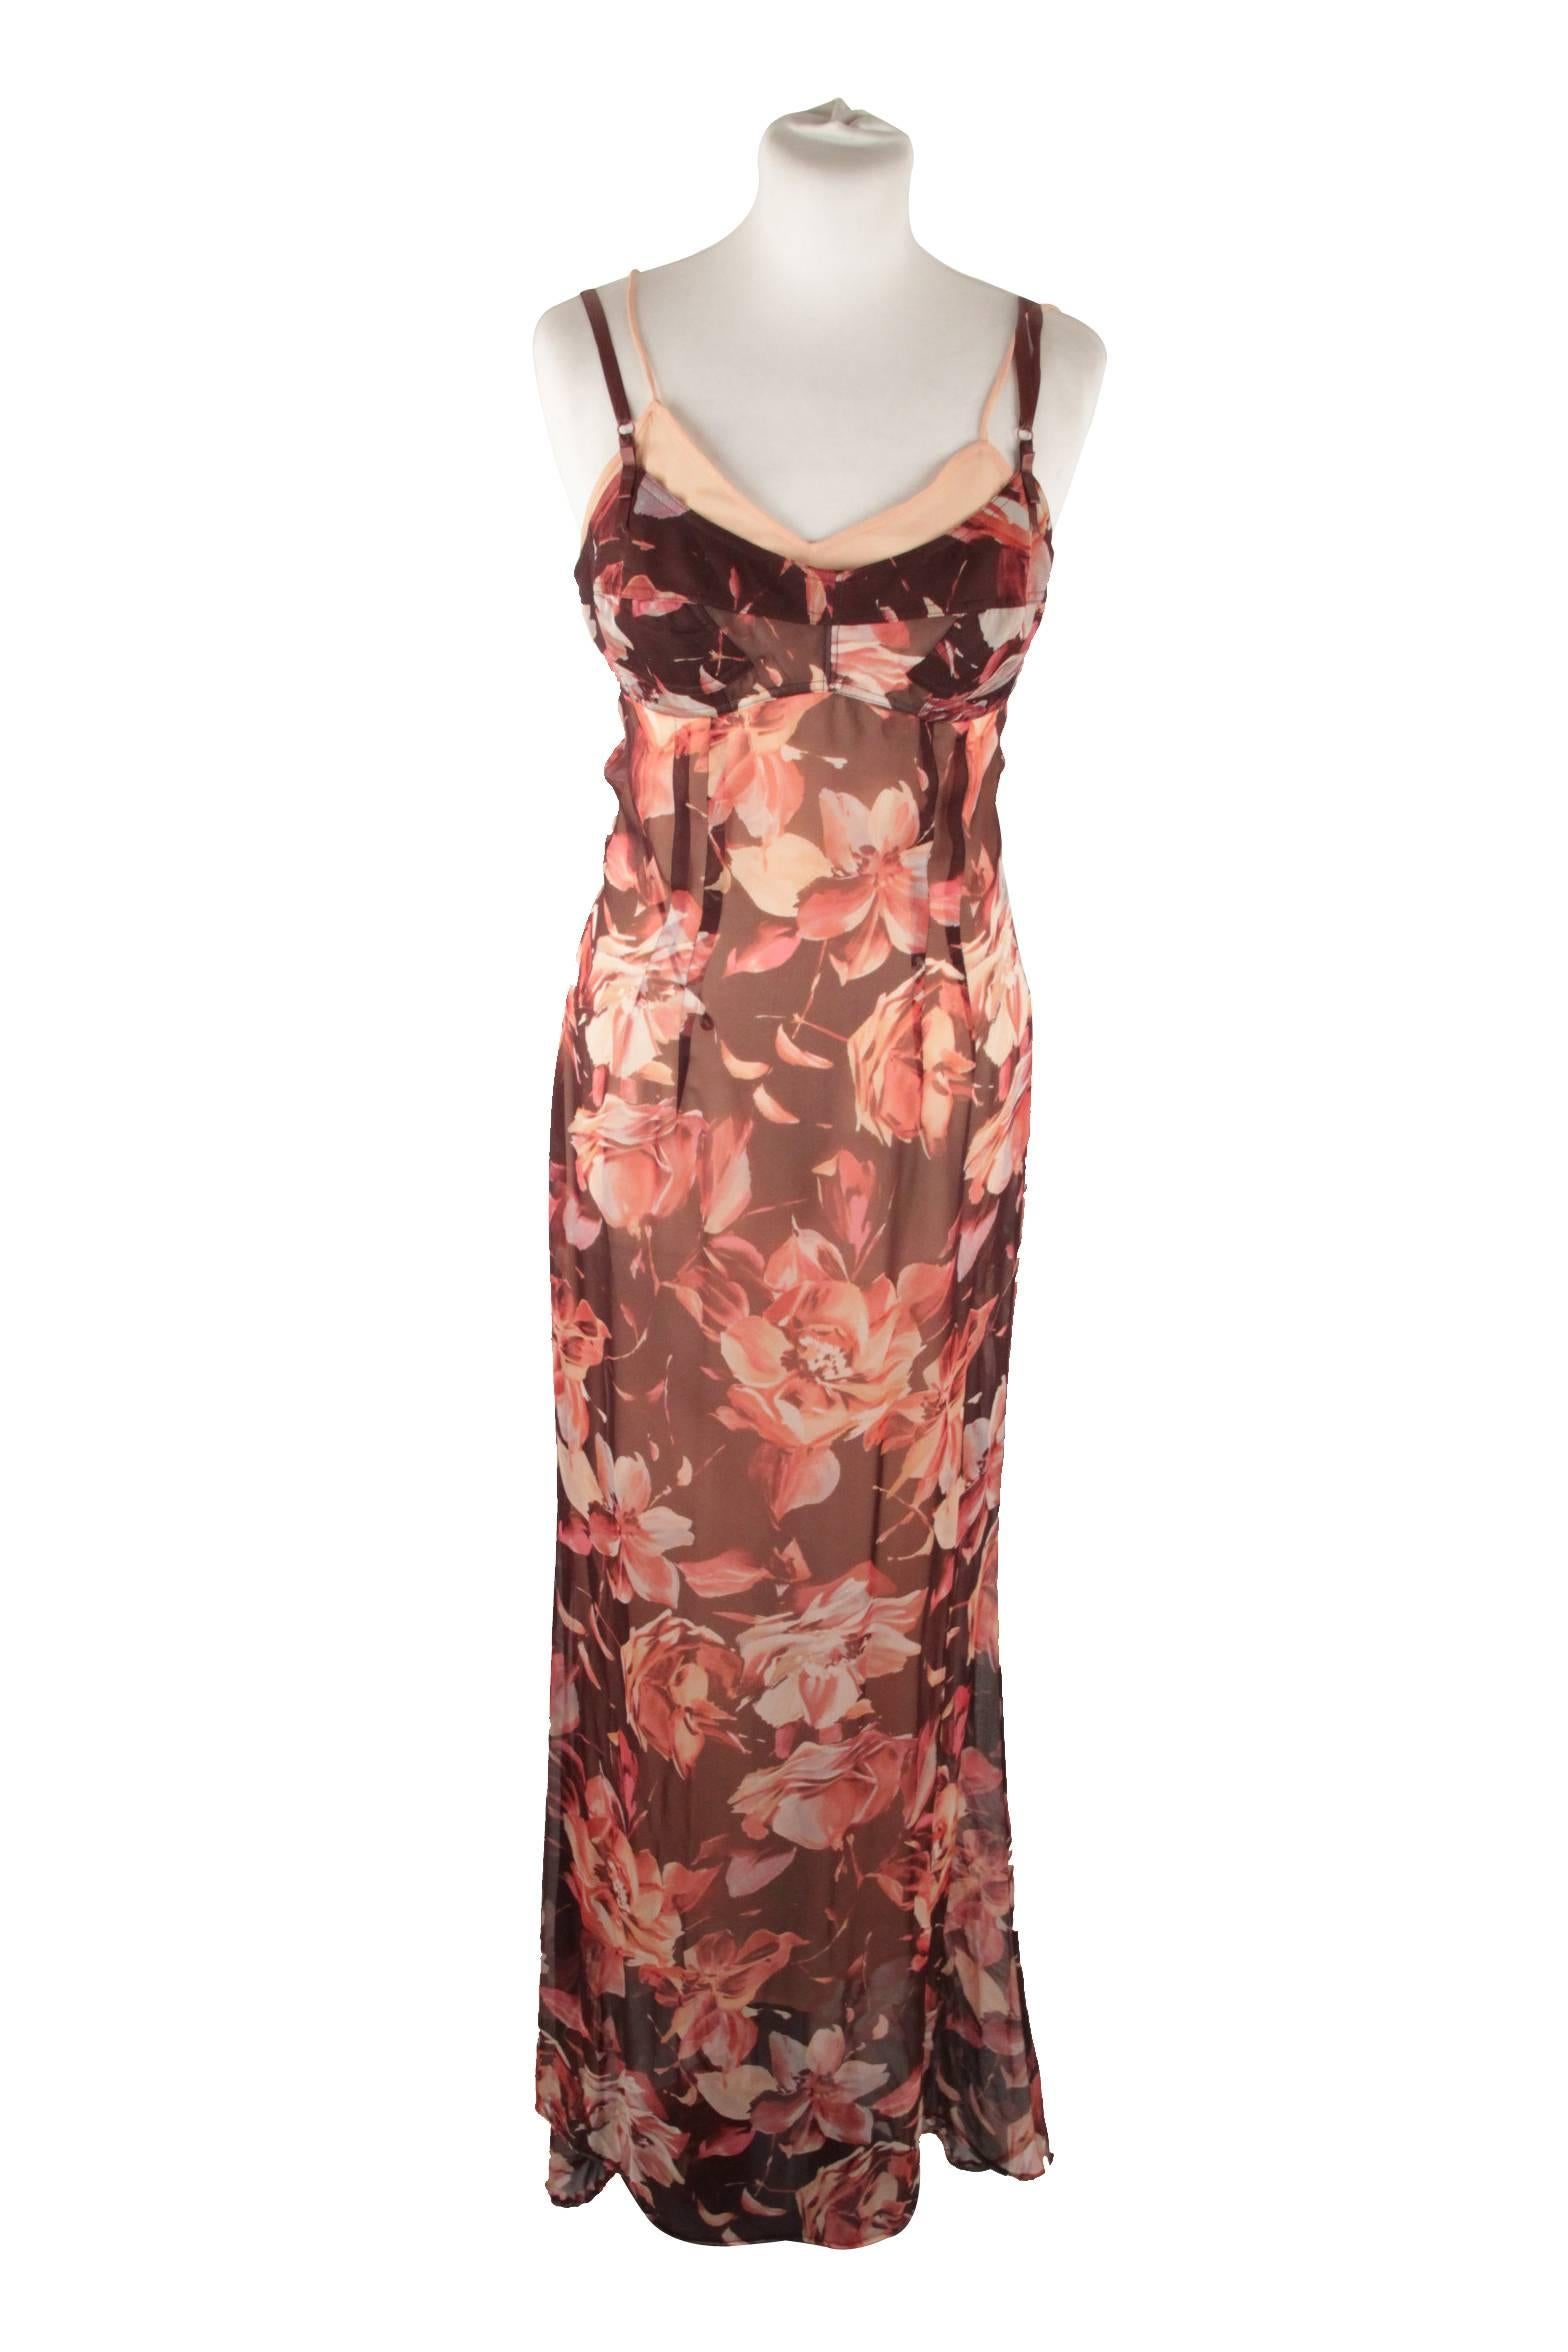 - Beautiful floral Dolce & Gabbana long cami dress
- Matching Long pure silk overcoat with mink fur collar 
- 100% Silk 
- Adjustable slim shoulder straps
- Silk slip-on lining
- Hook and eye closure and zip closure on the back 
- Size: 42